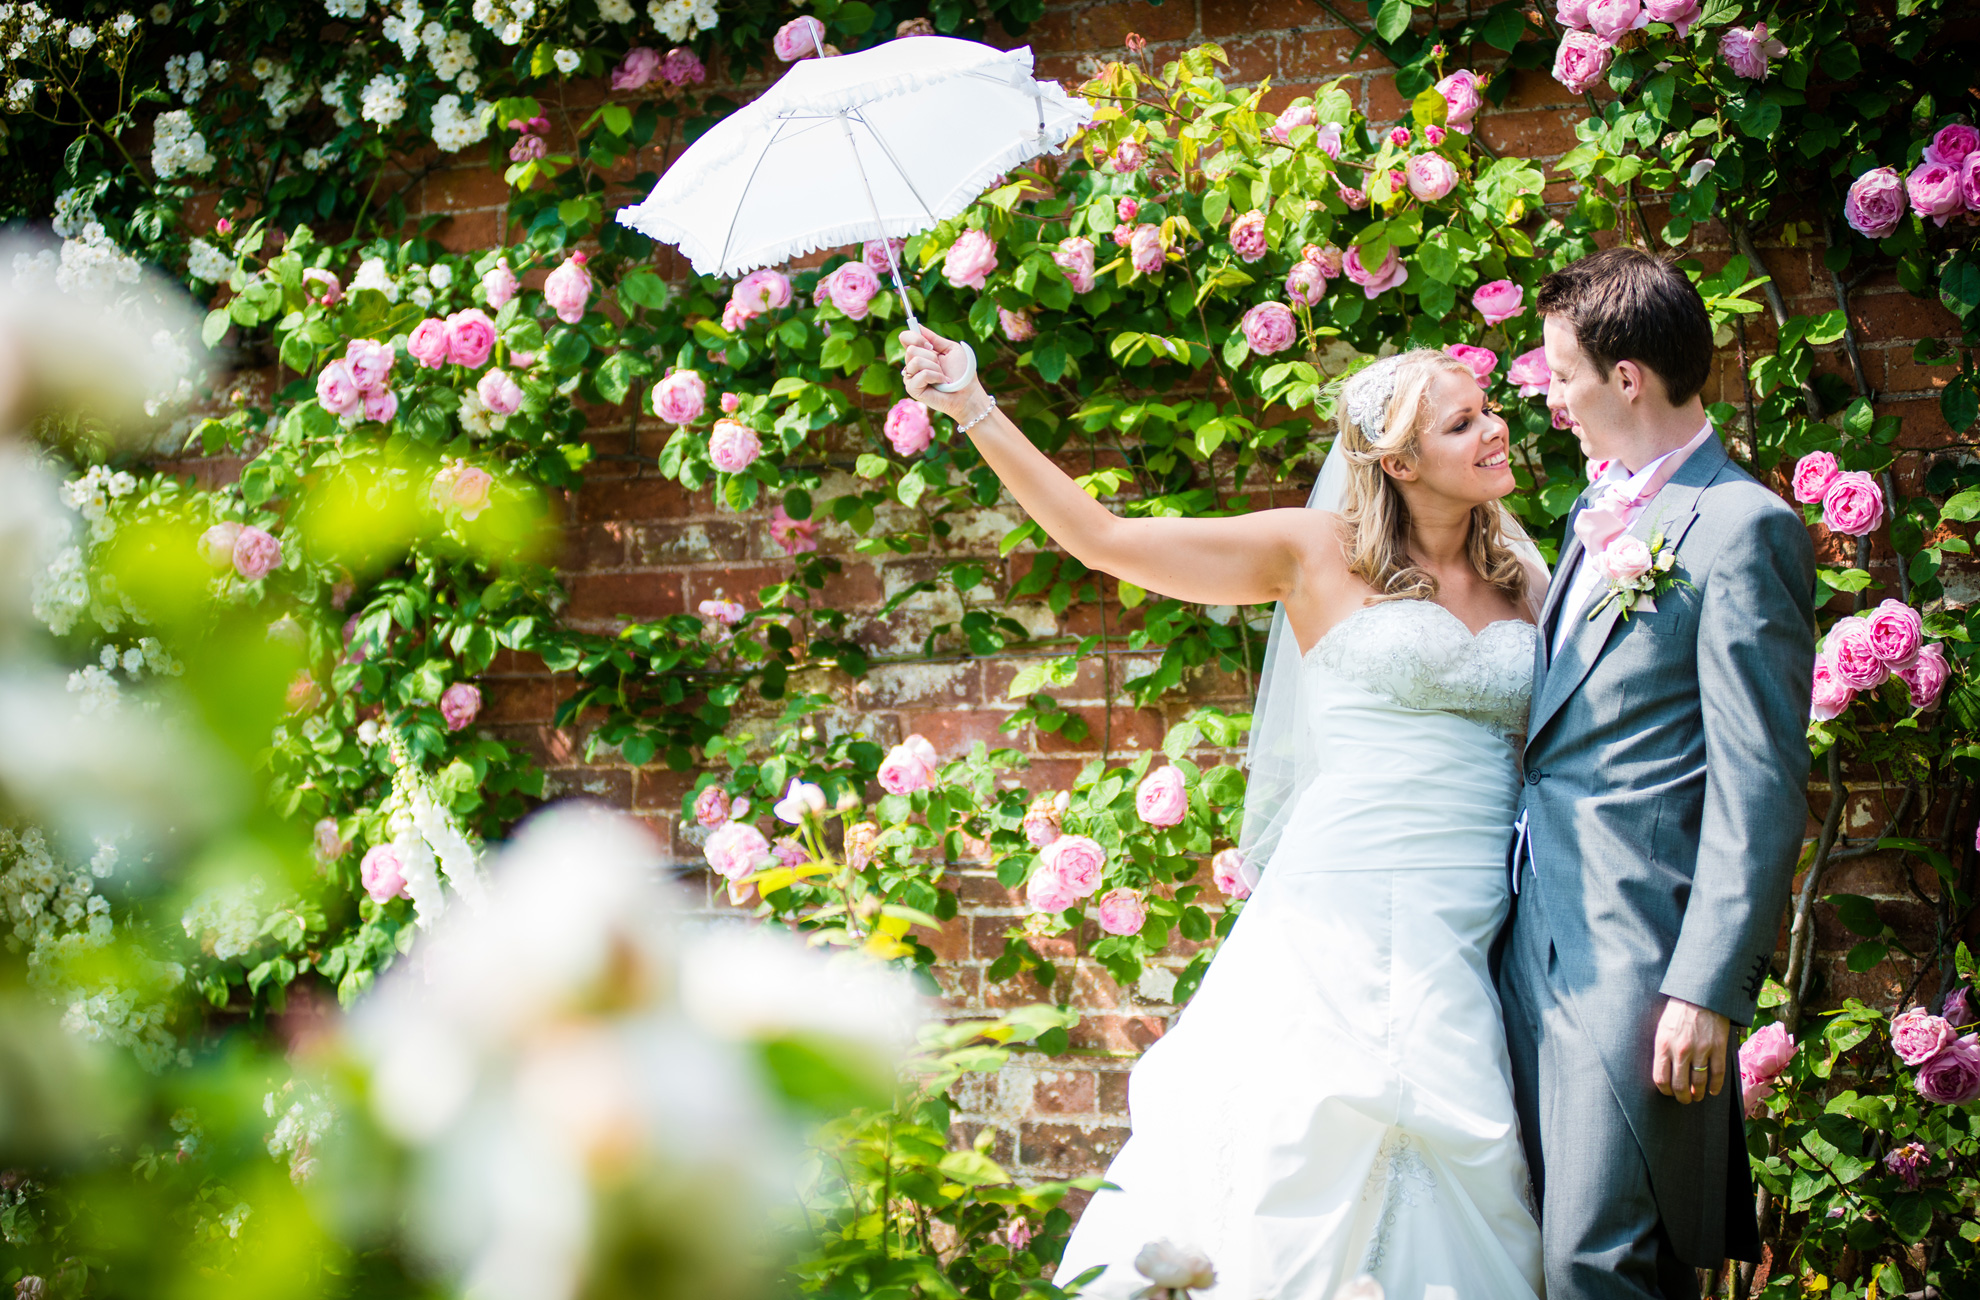 Summer Weddings - Make The Most Of The Gardens at Combermere Abbey